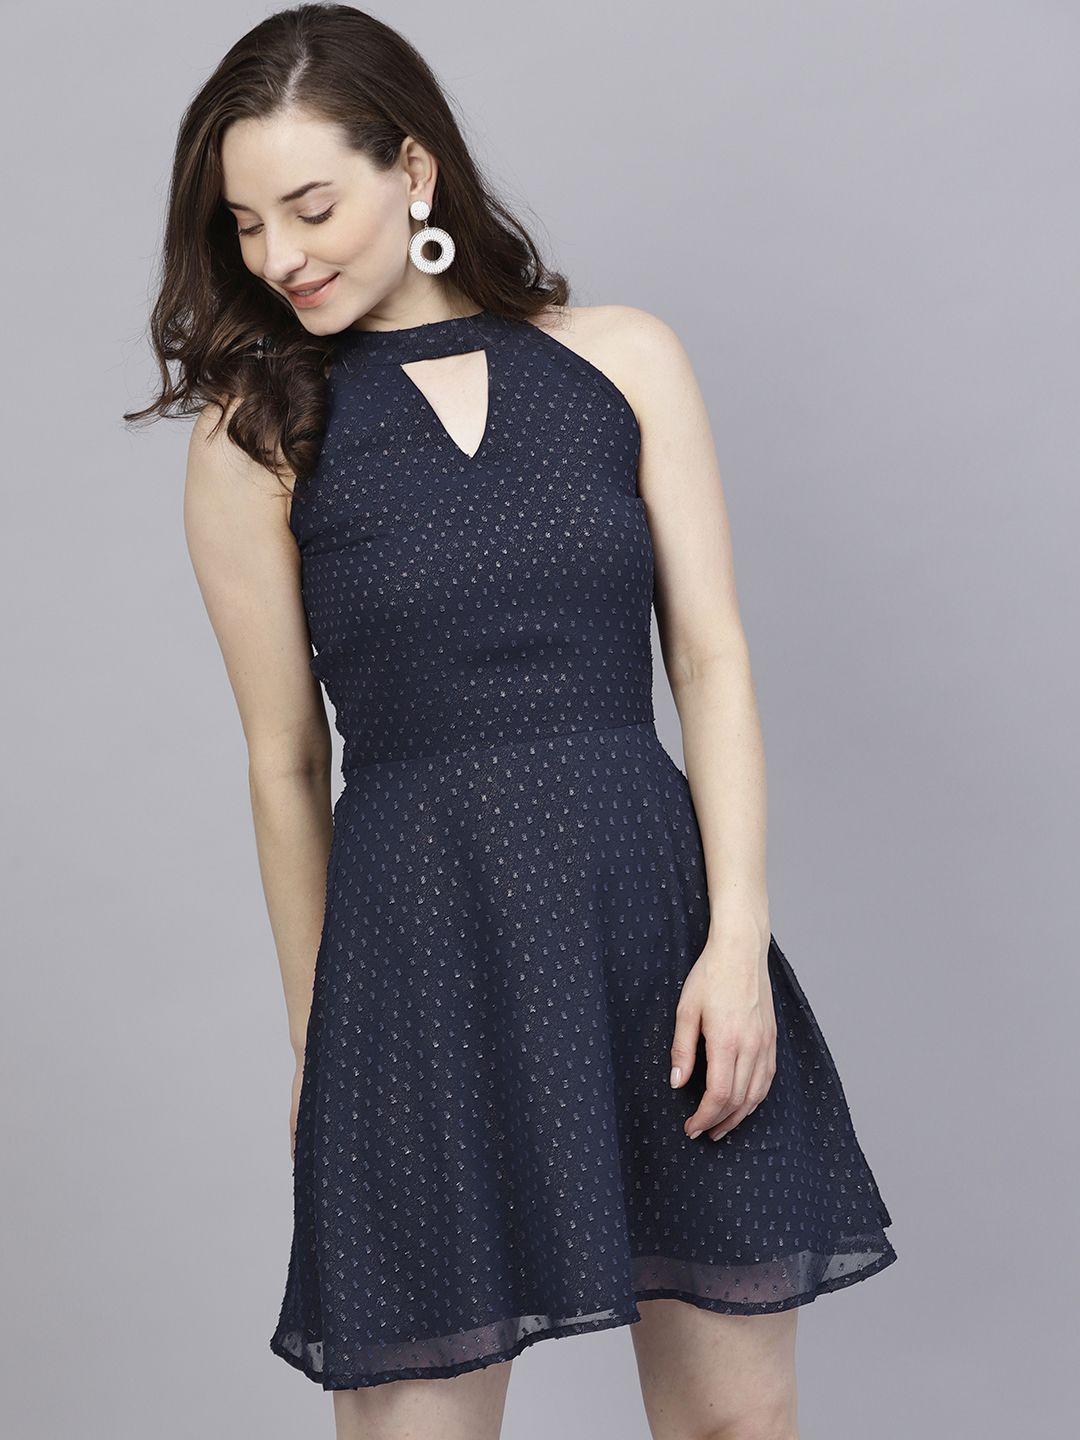 street 9 women navy blue embellished fit and flare dress